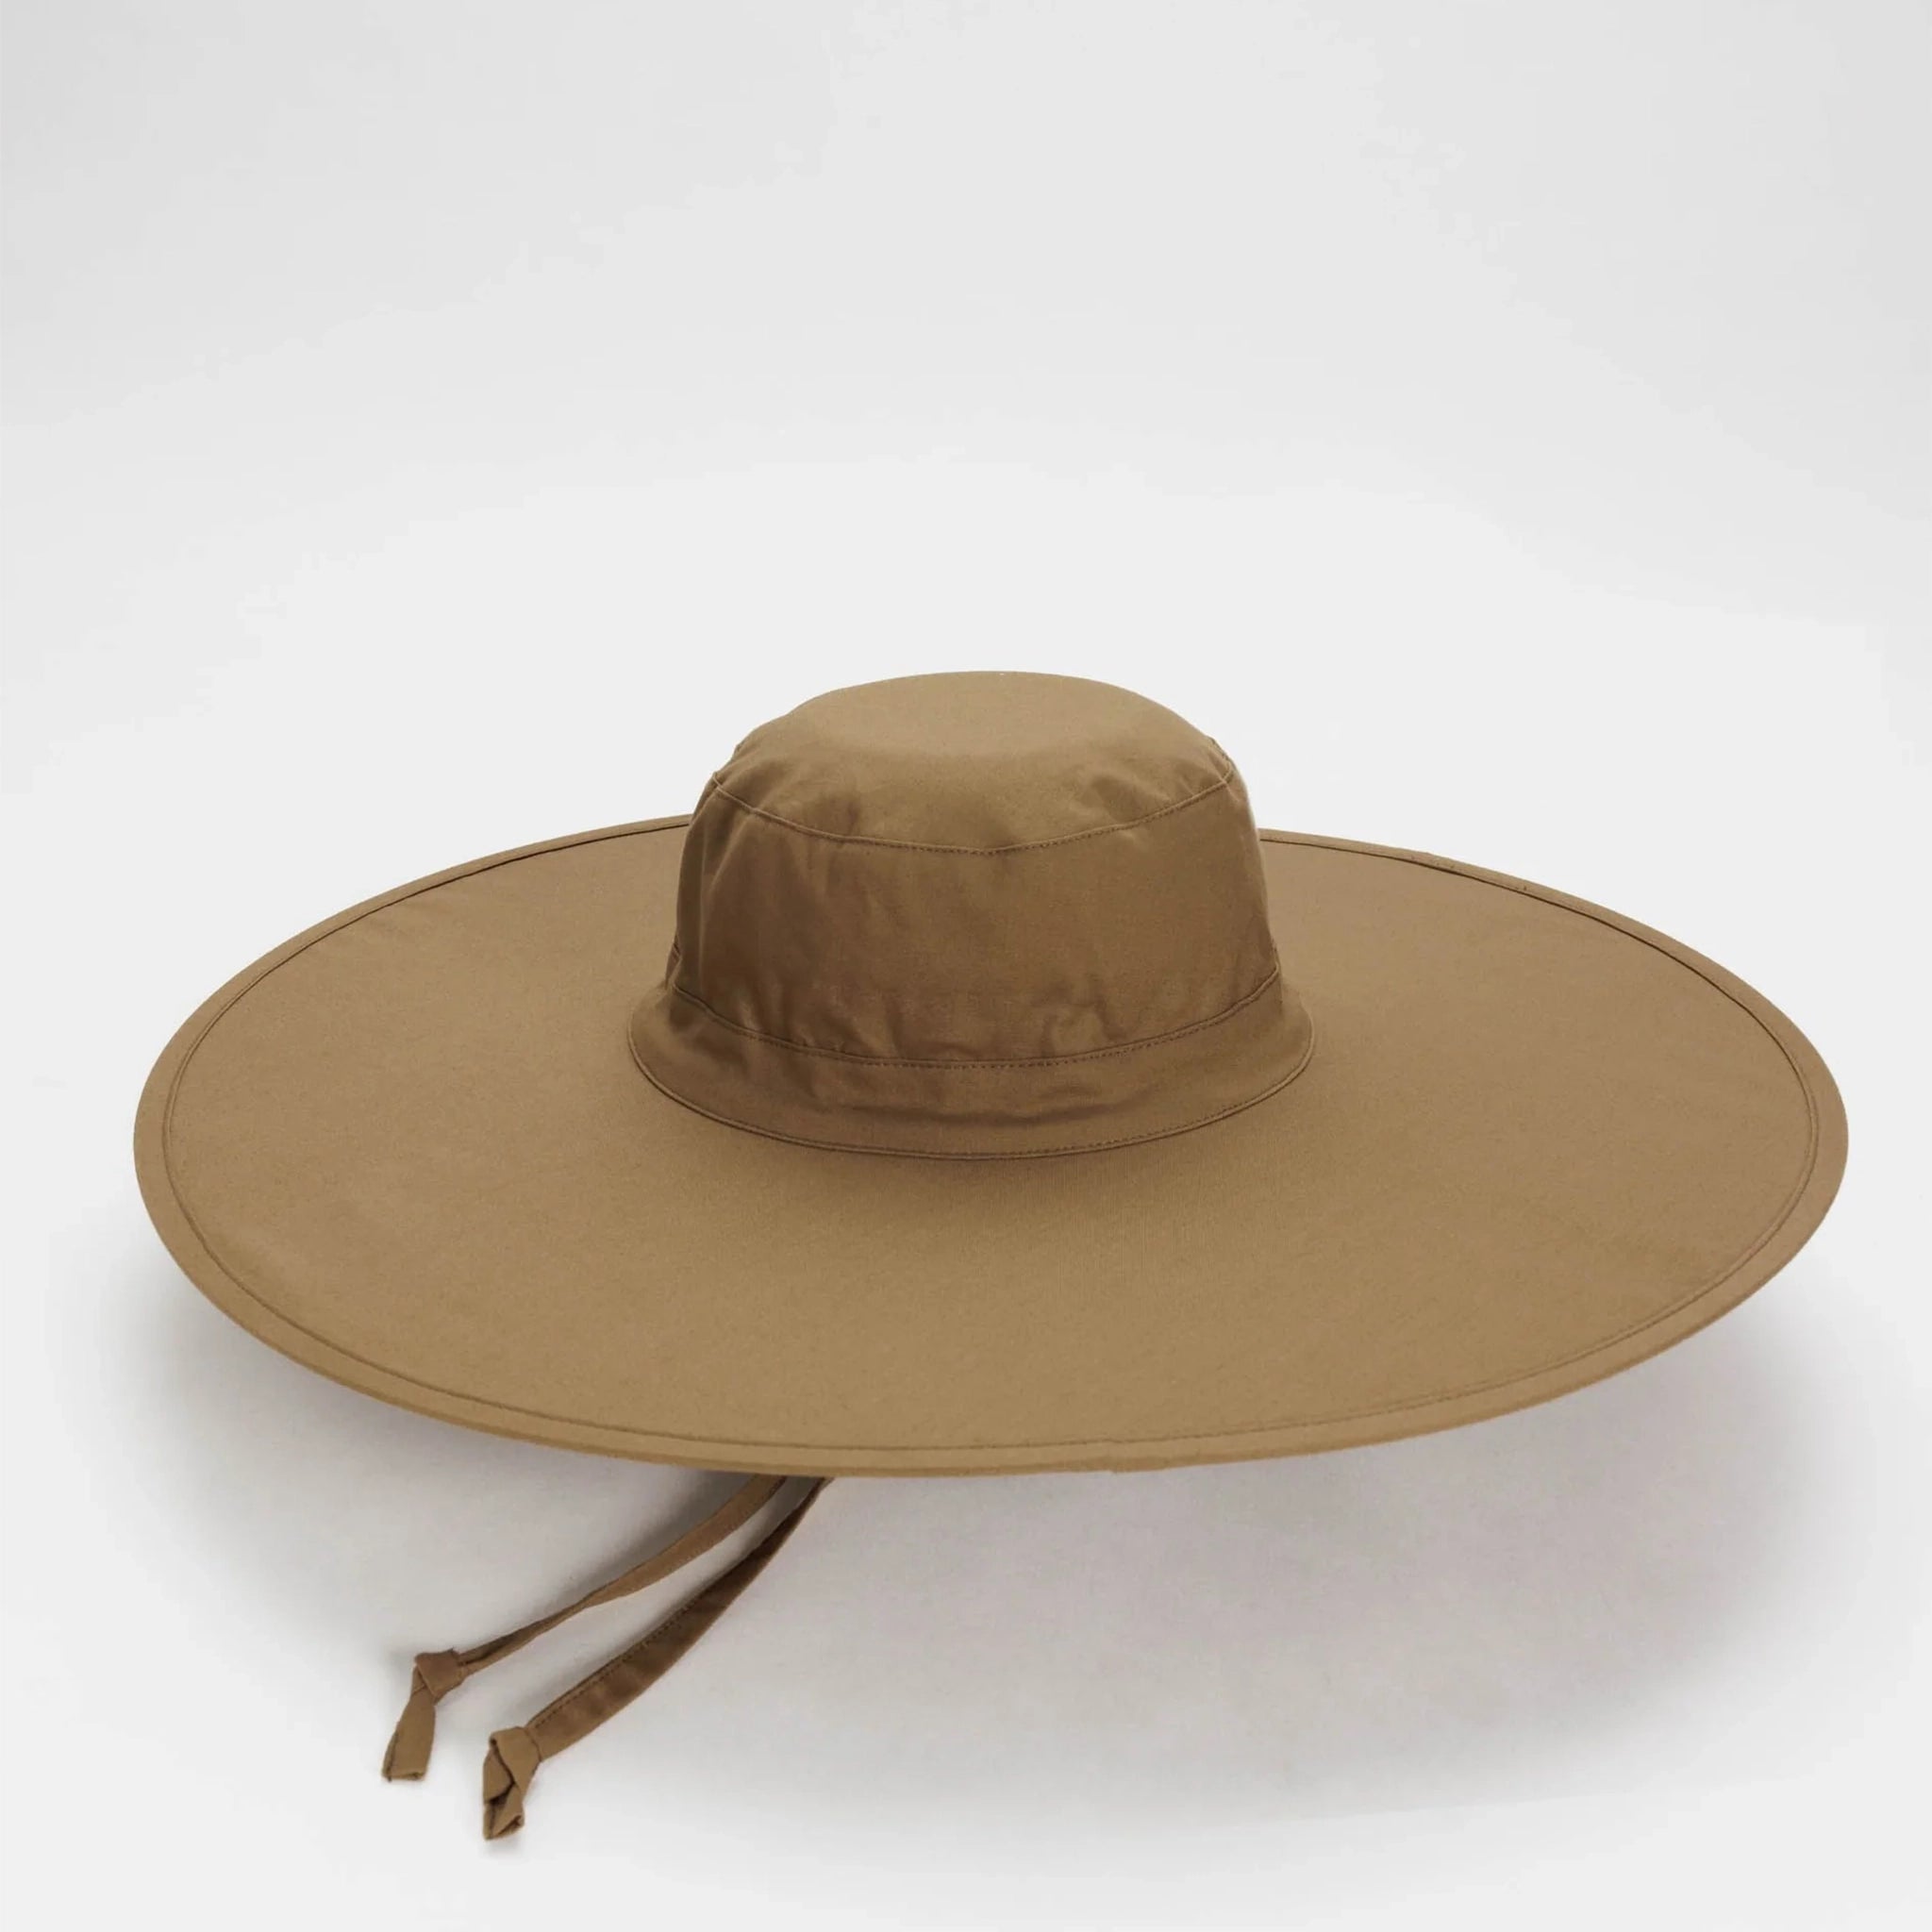 On a white background is a packable sun hat in a brown shade that has an extra large brim, two straps for securing and folds down to a compact size for easy on the go travel. 